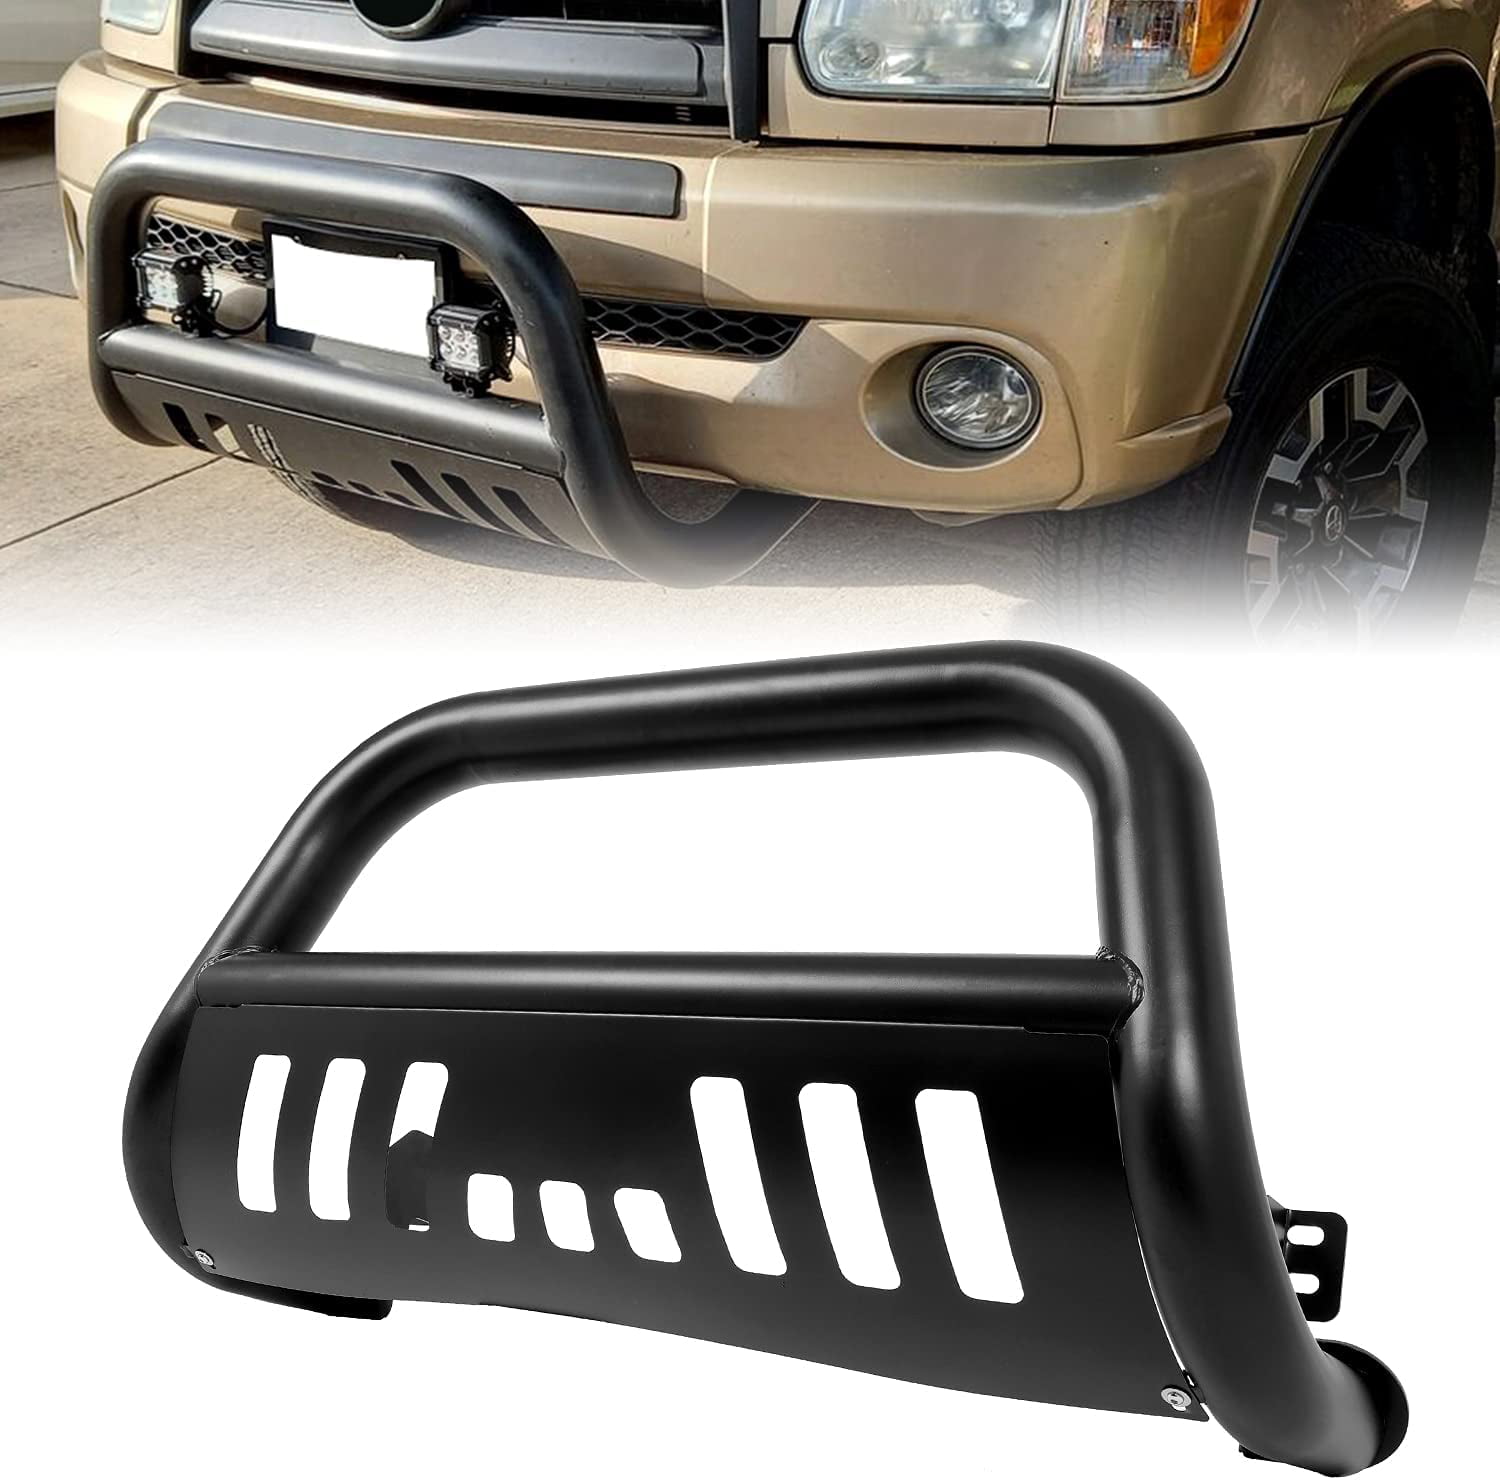 New Grille Grill Brush Guard Bumper For 02-09 Chevy Chevrolet Trailblazer EXT 